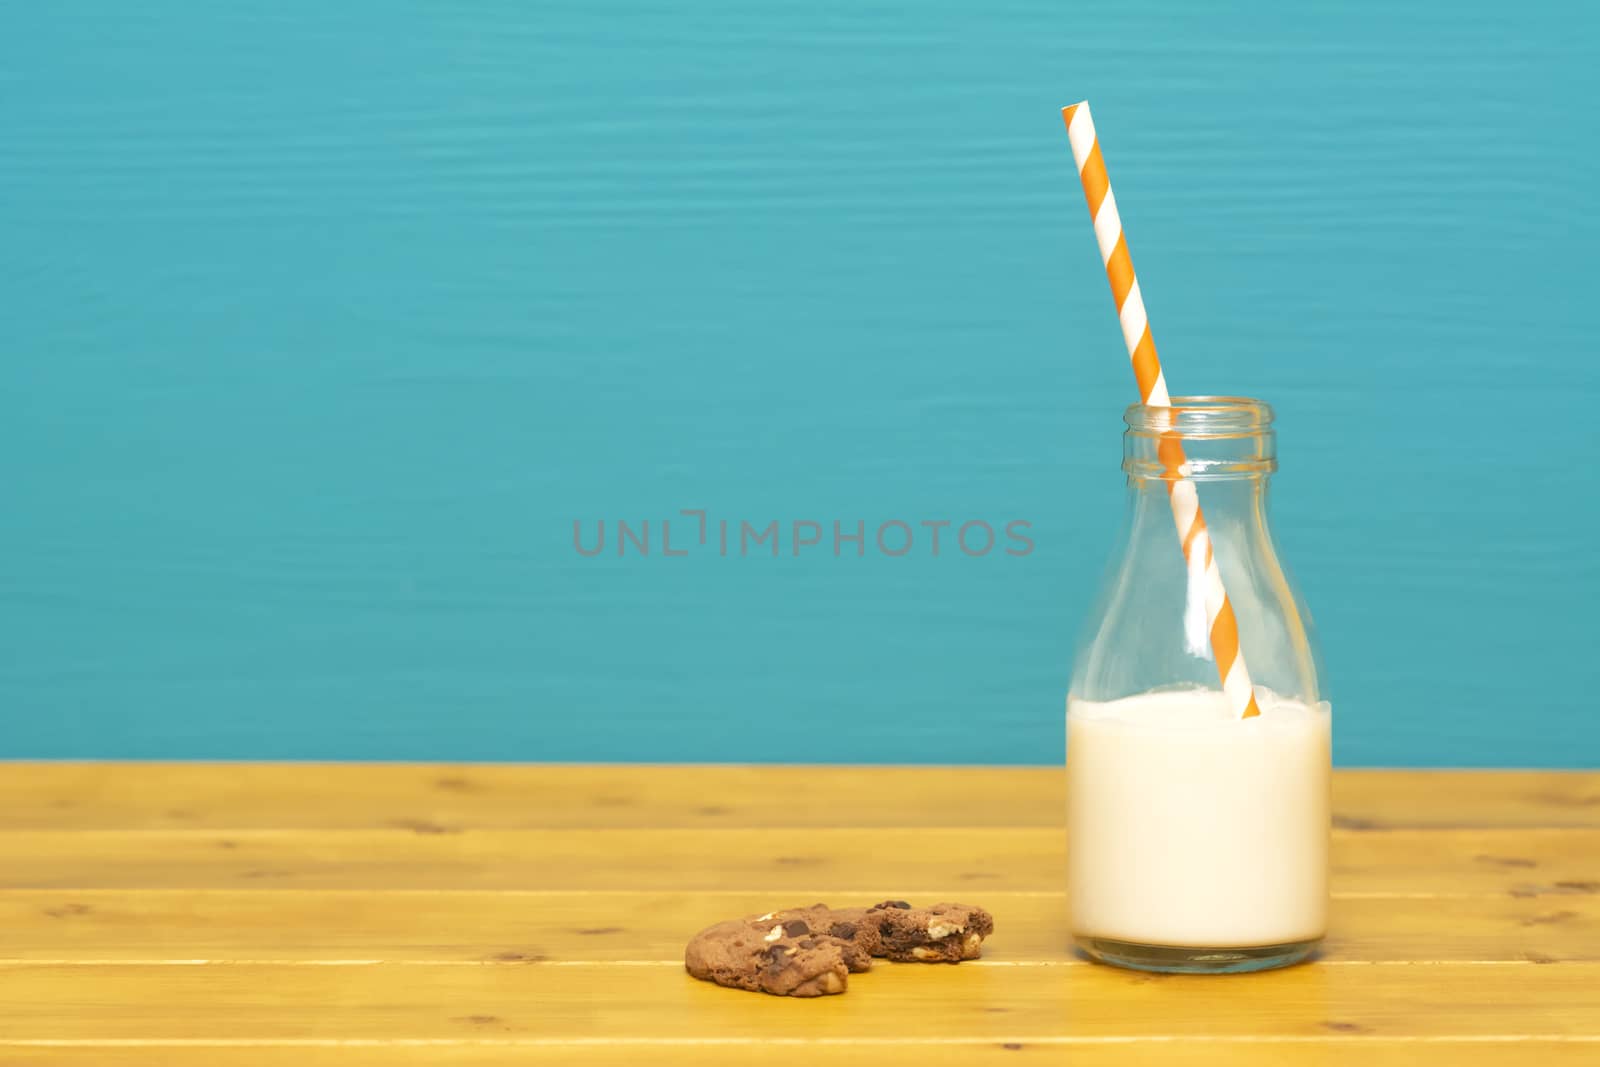 One-third pint glass milk bottle half full with fresh creamy milk with a retro straw and a half-eaten chocolate chip cookie, on a wooden table against a teal background